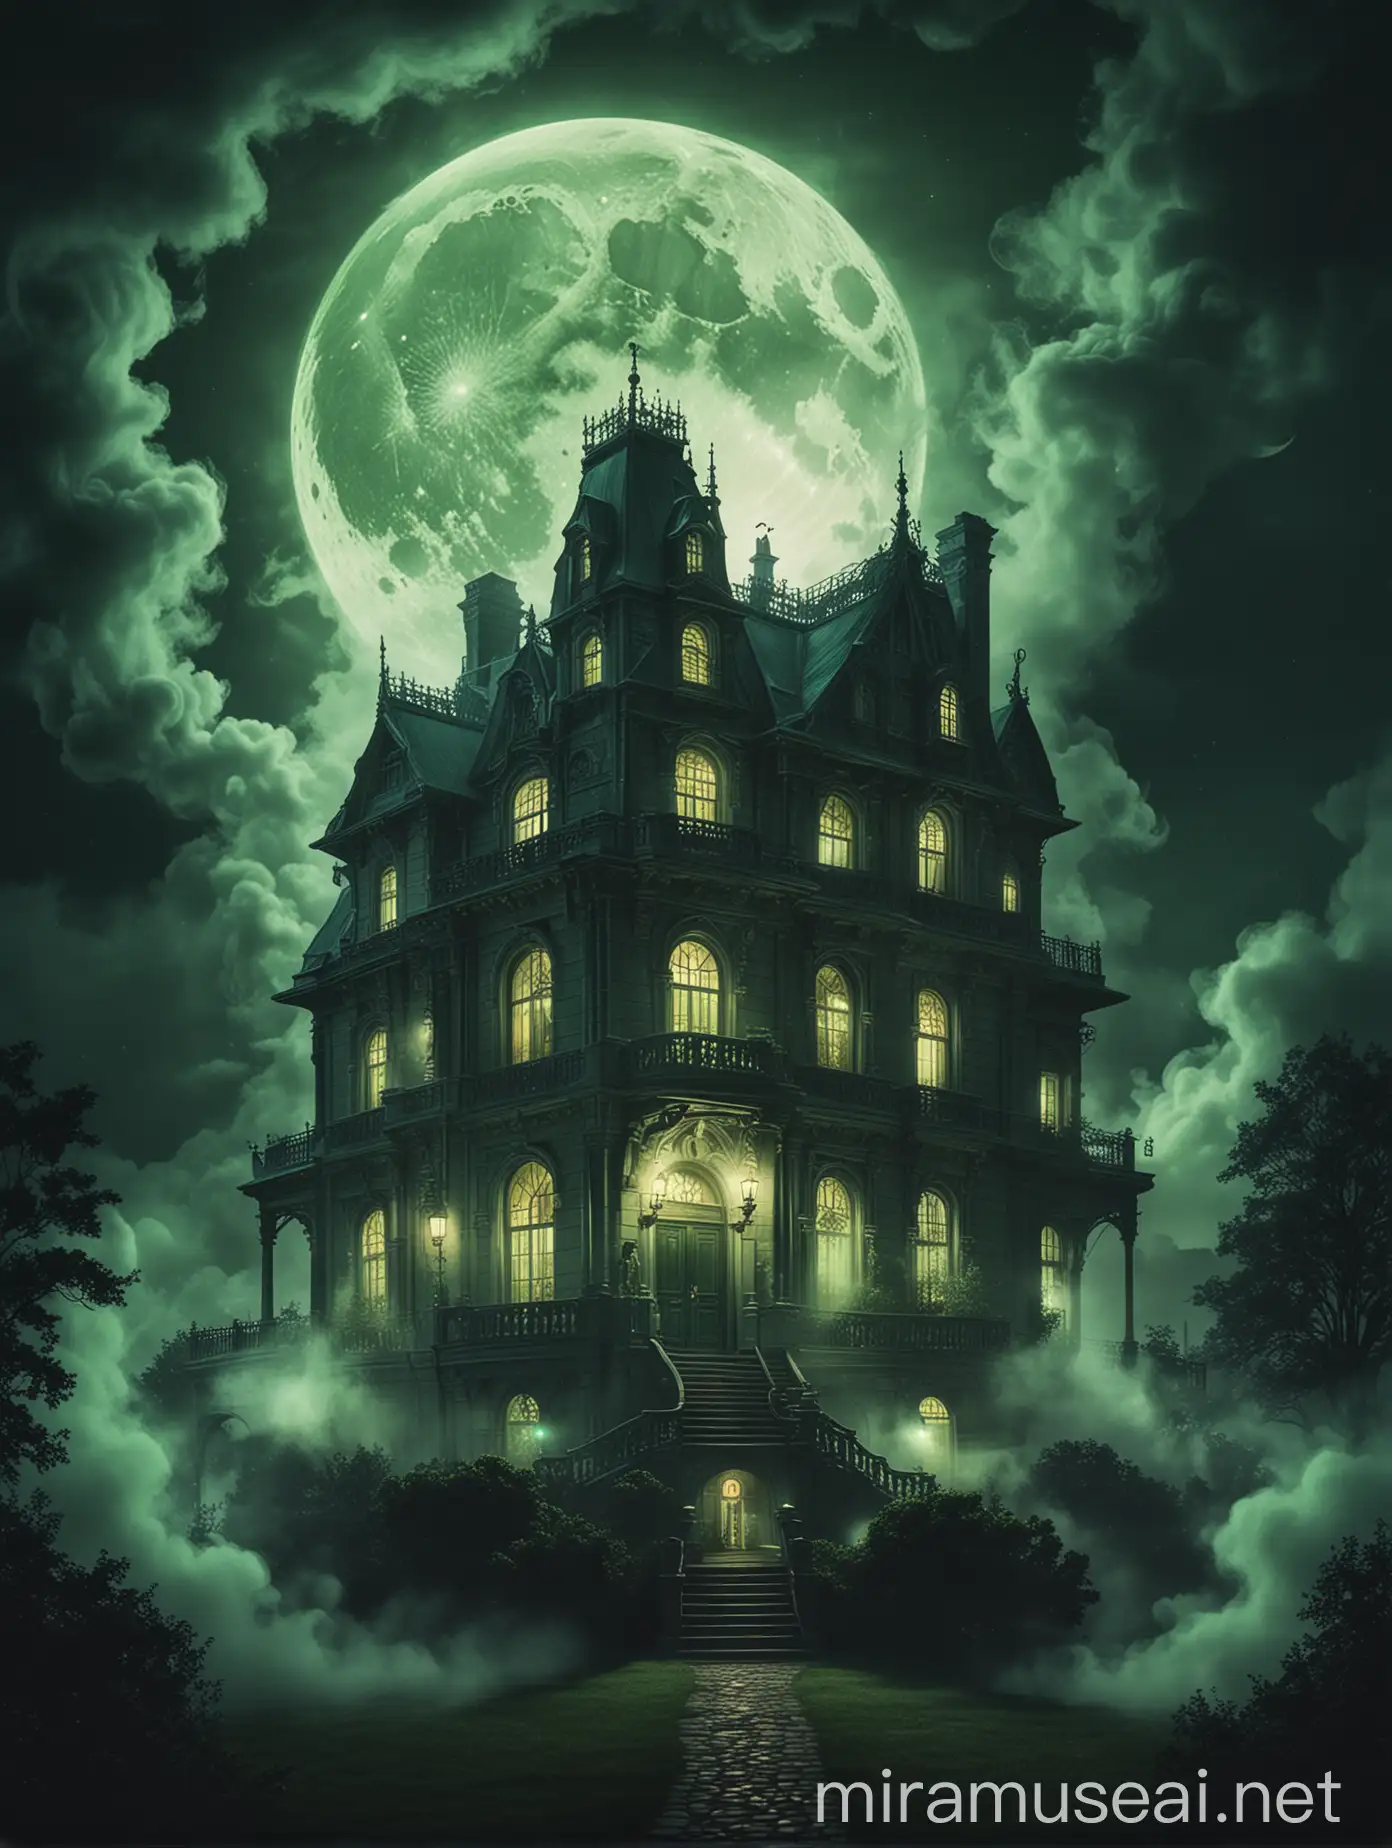 A mansion in the dark night with green smoke engulfing around with a glowing moon